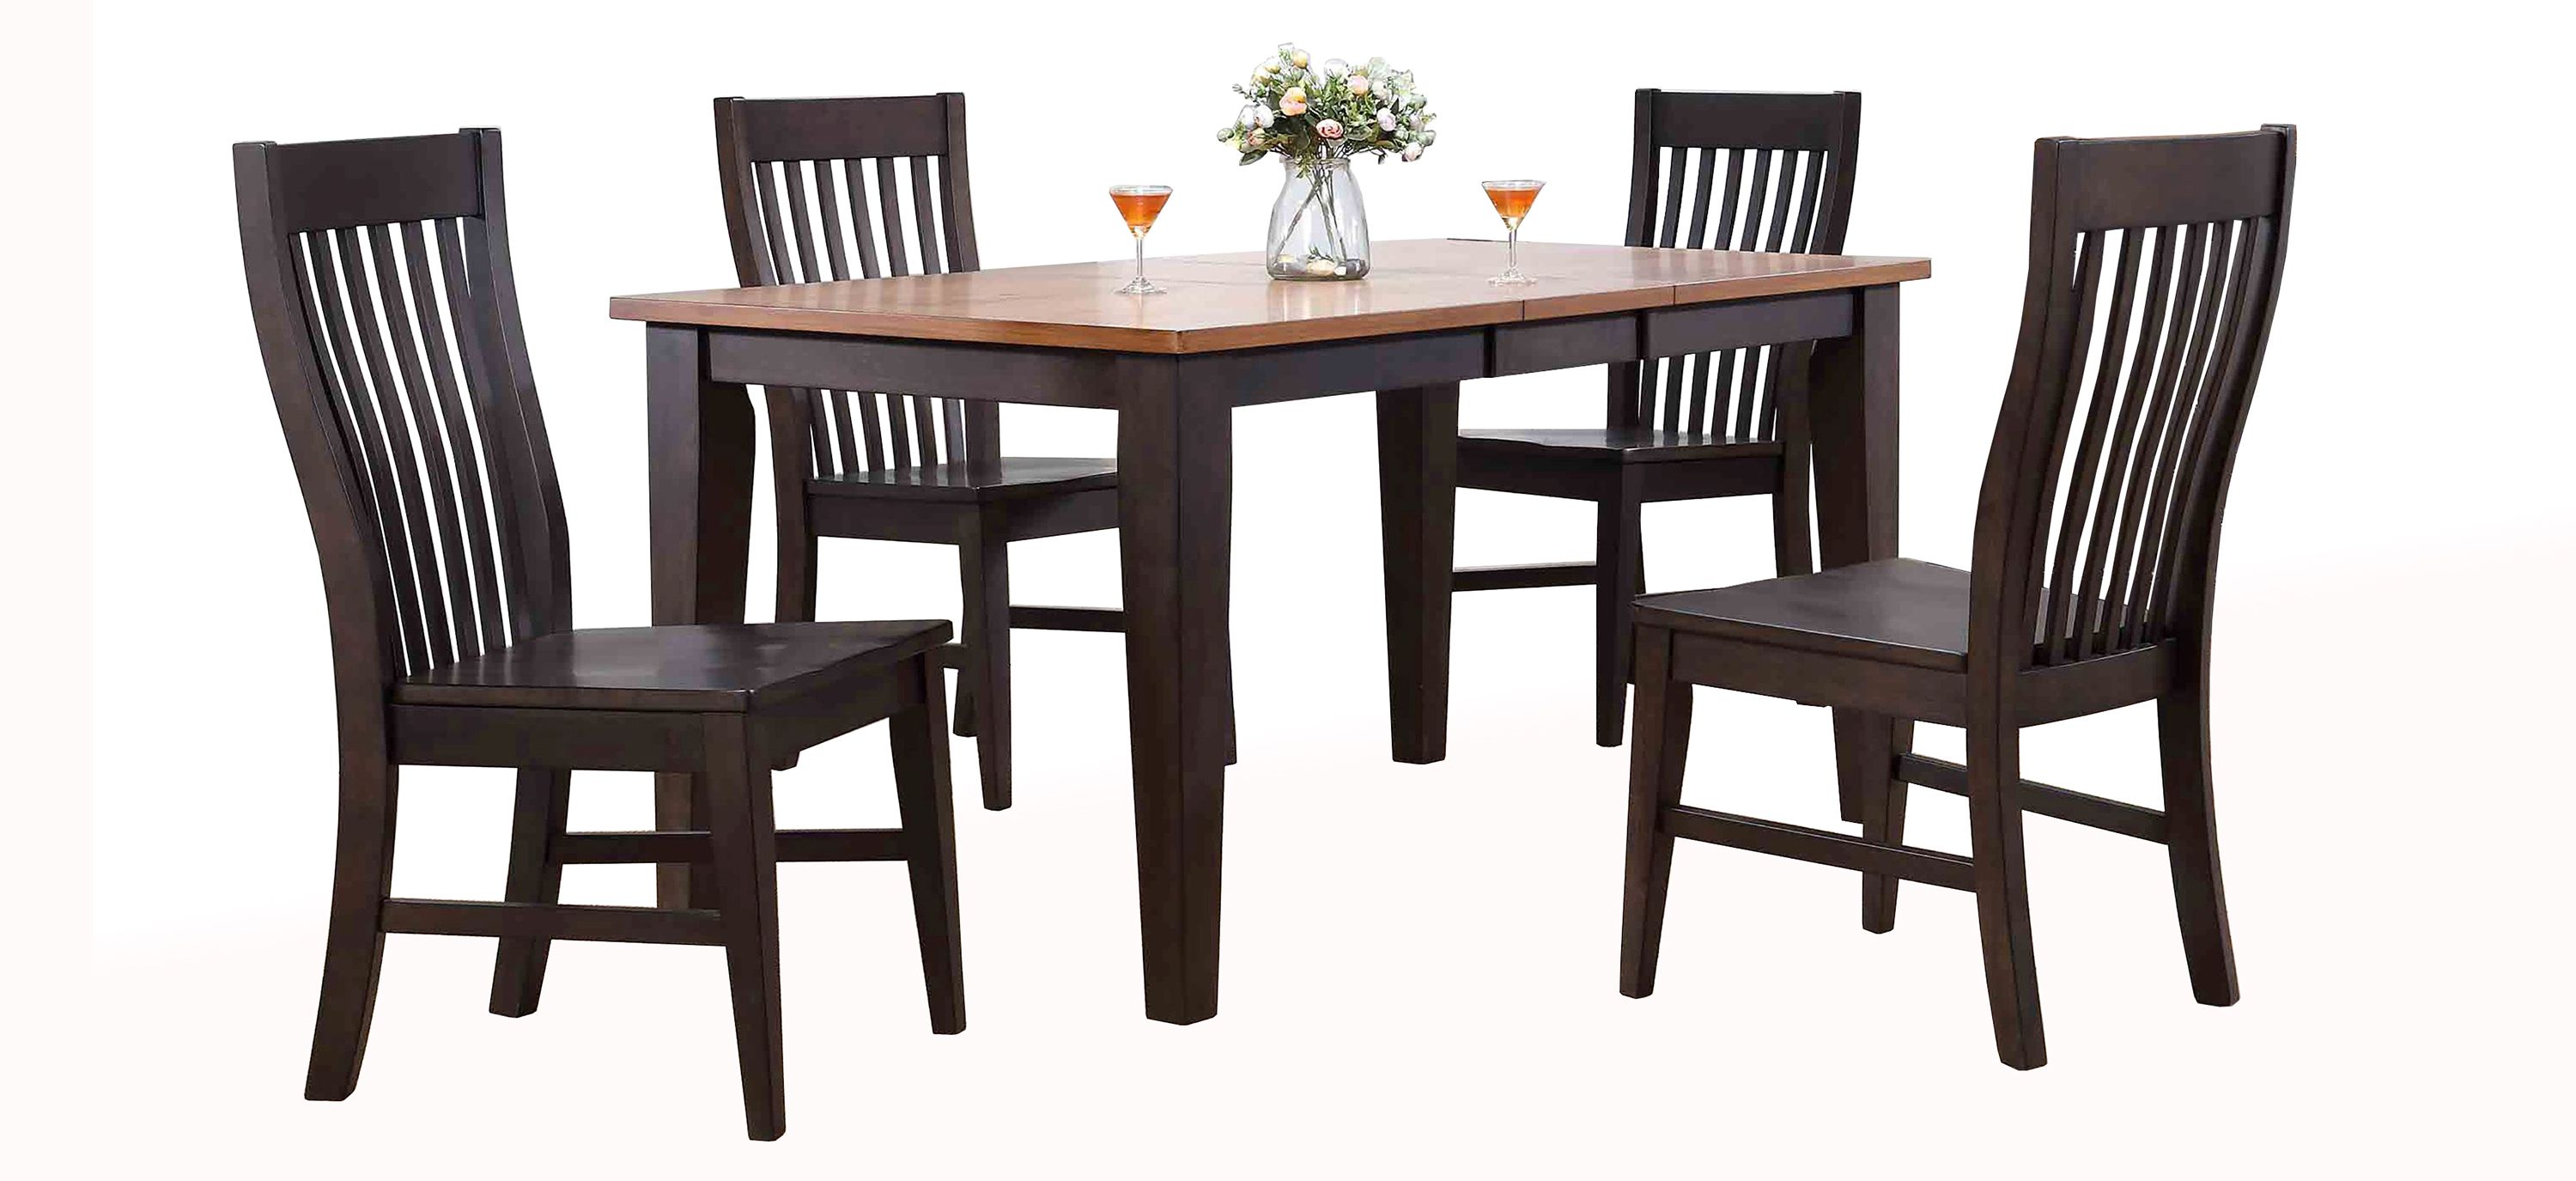 Choices 5-pc. Dining Set